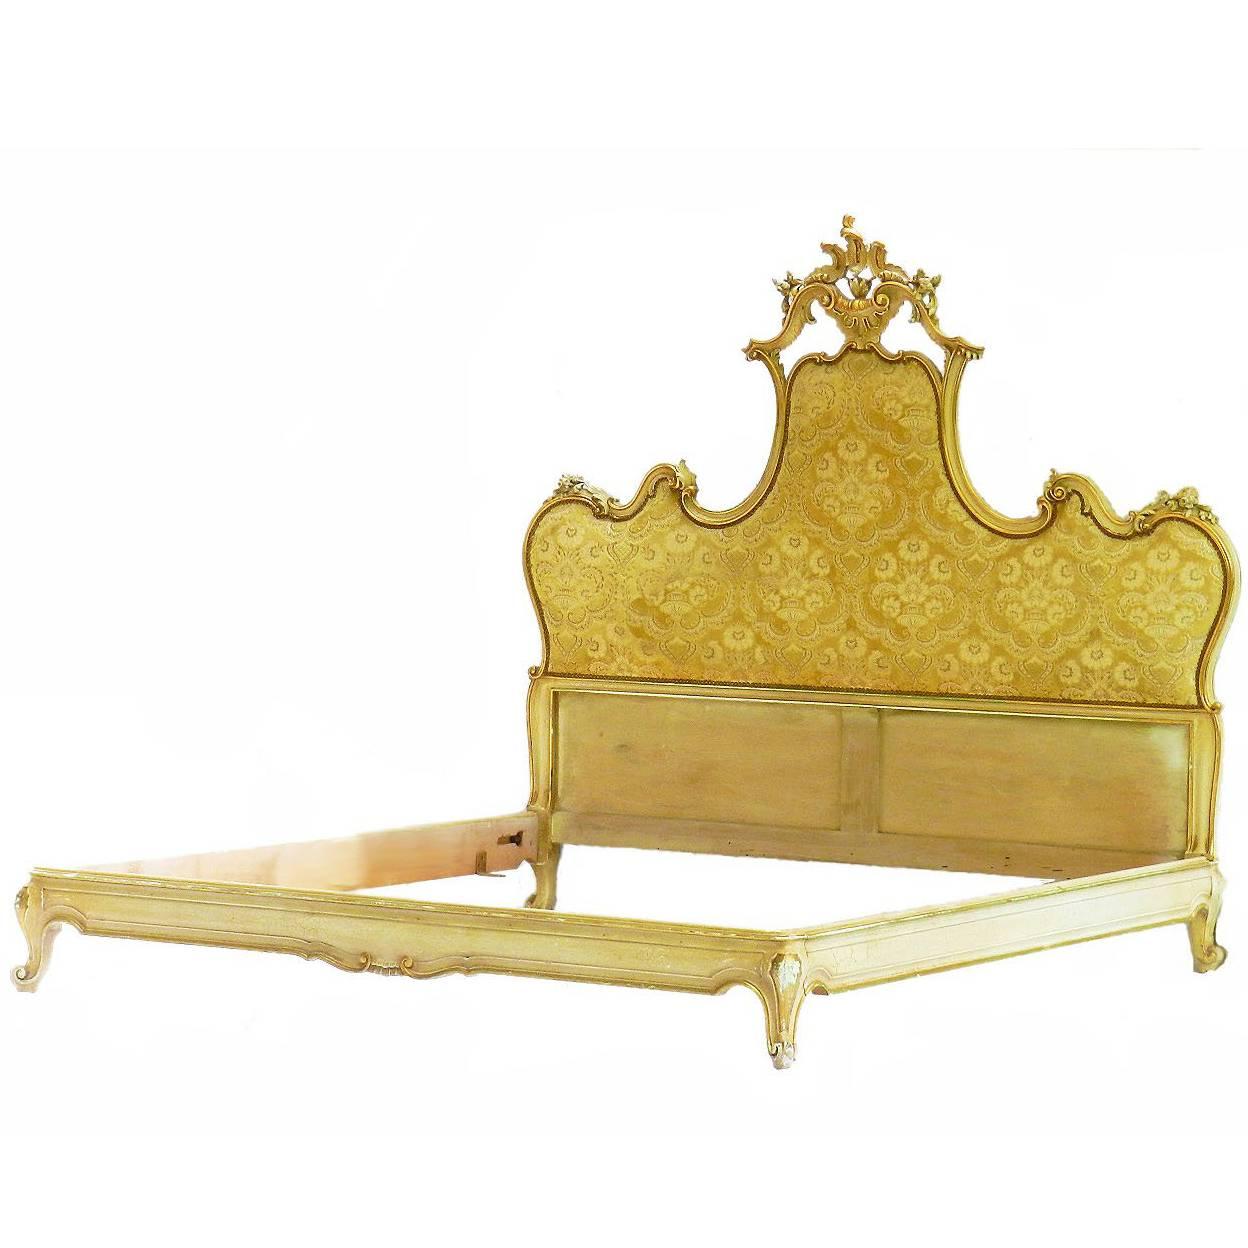 Italian Bed to Recover or Headboard Louis Revival UK Super King Carved Venetian